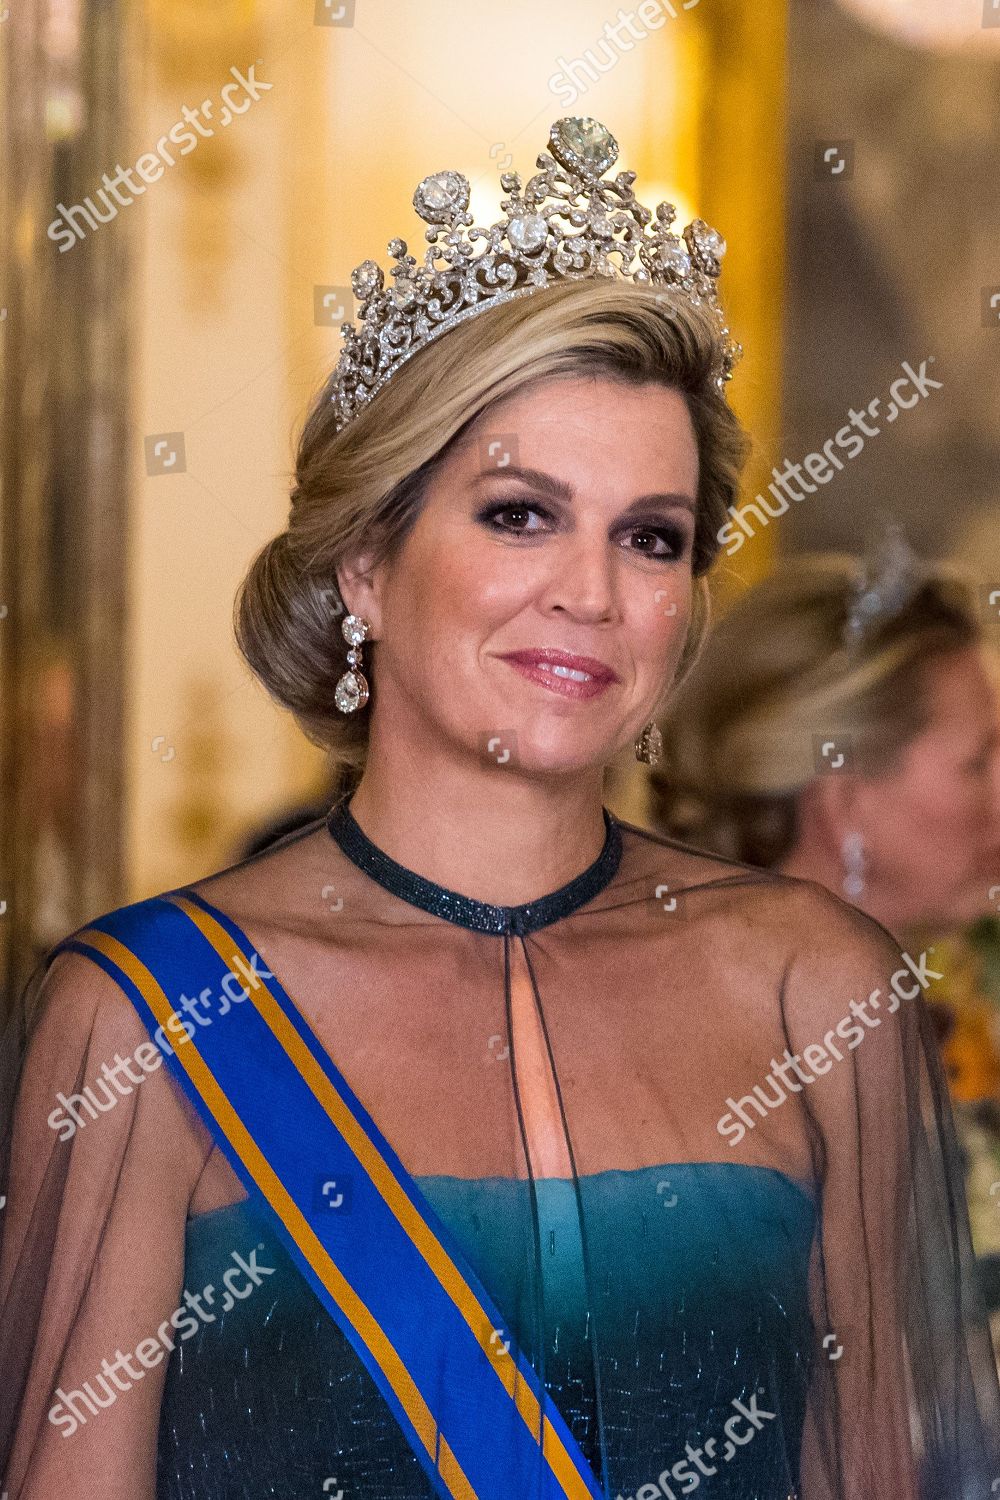 state-visit-of-the-king-and-queen-of-the-netherlands-london-uk-shutterstock-editorial-9942632at.jpg